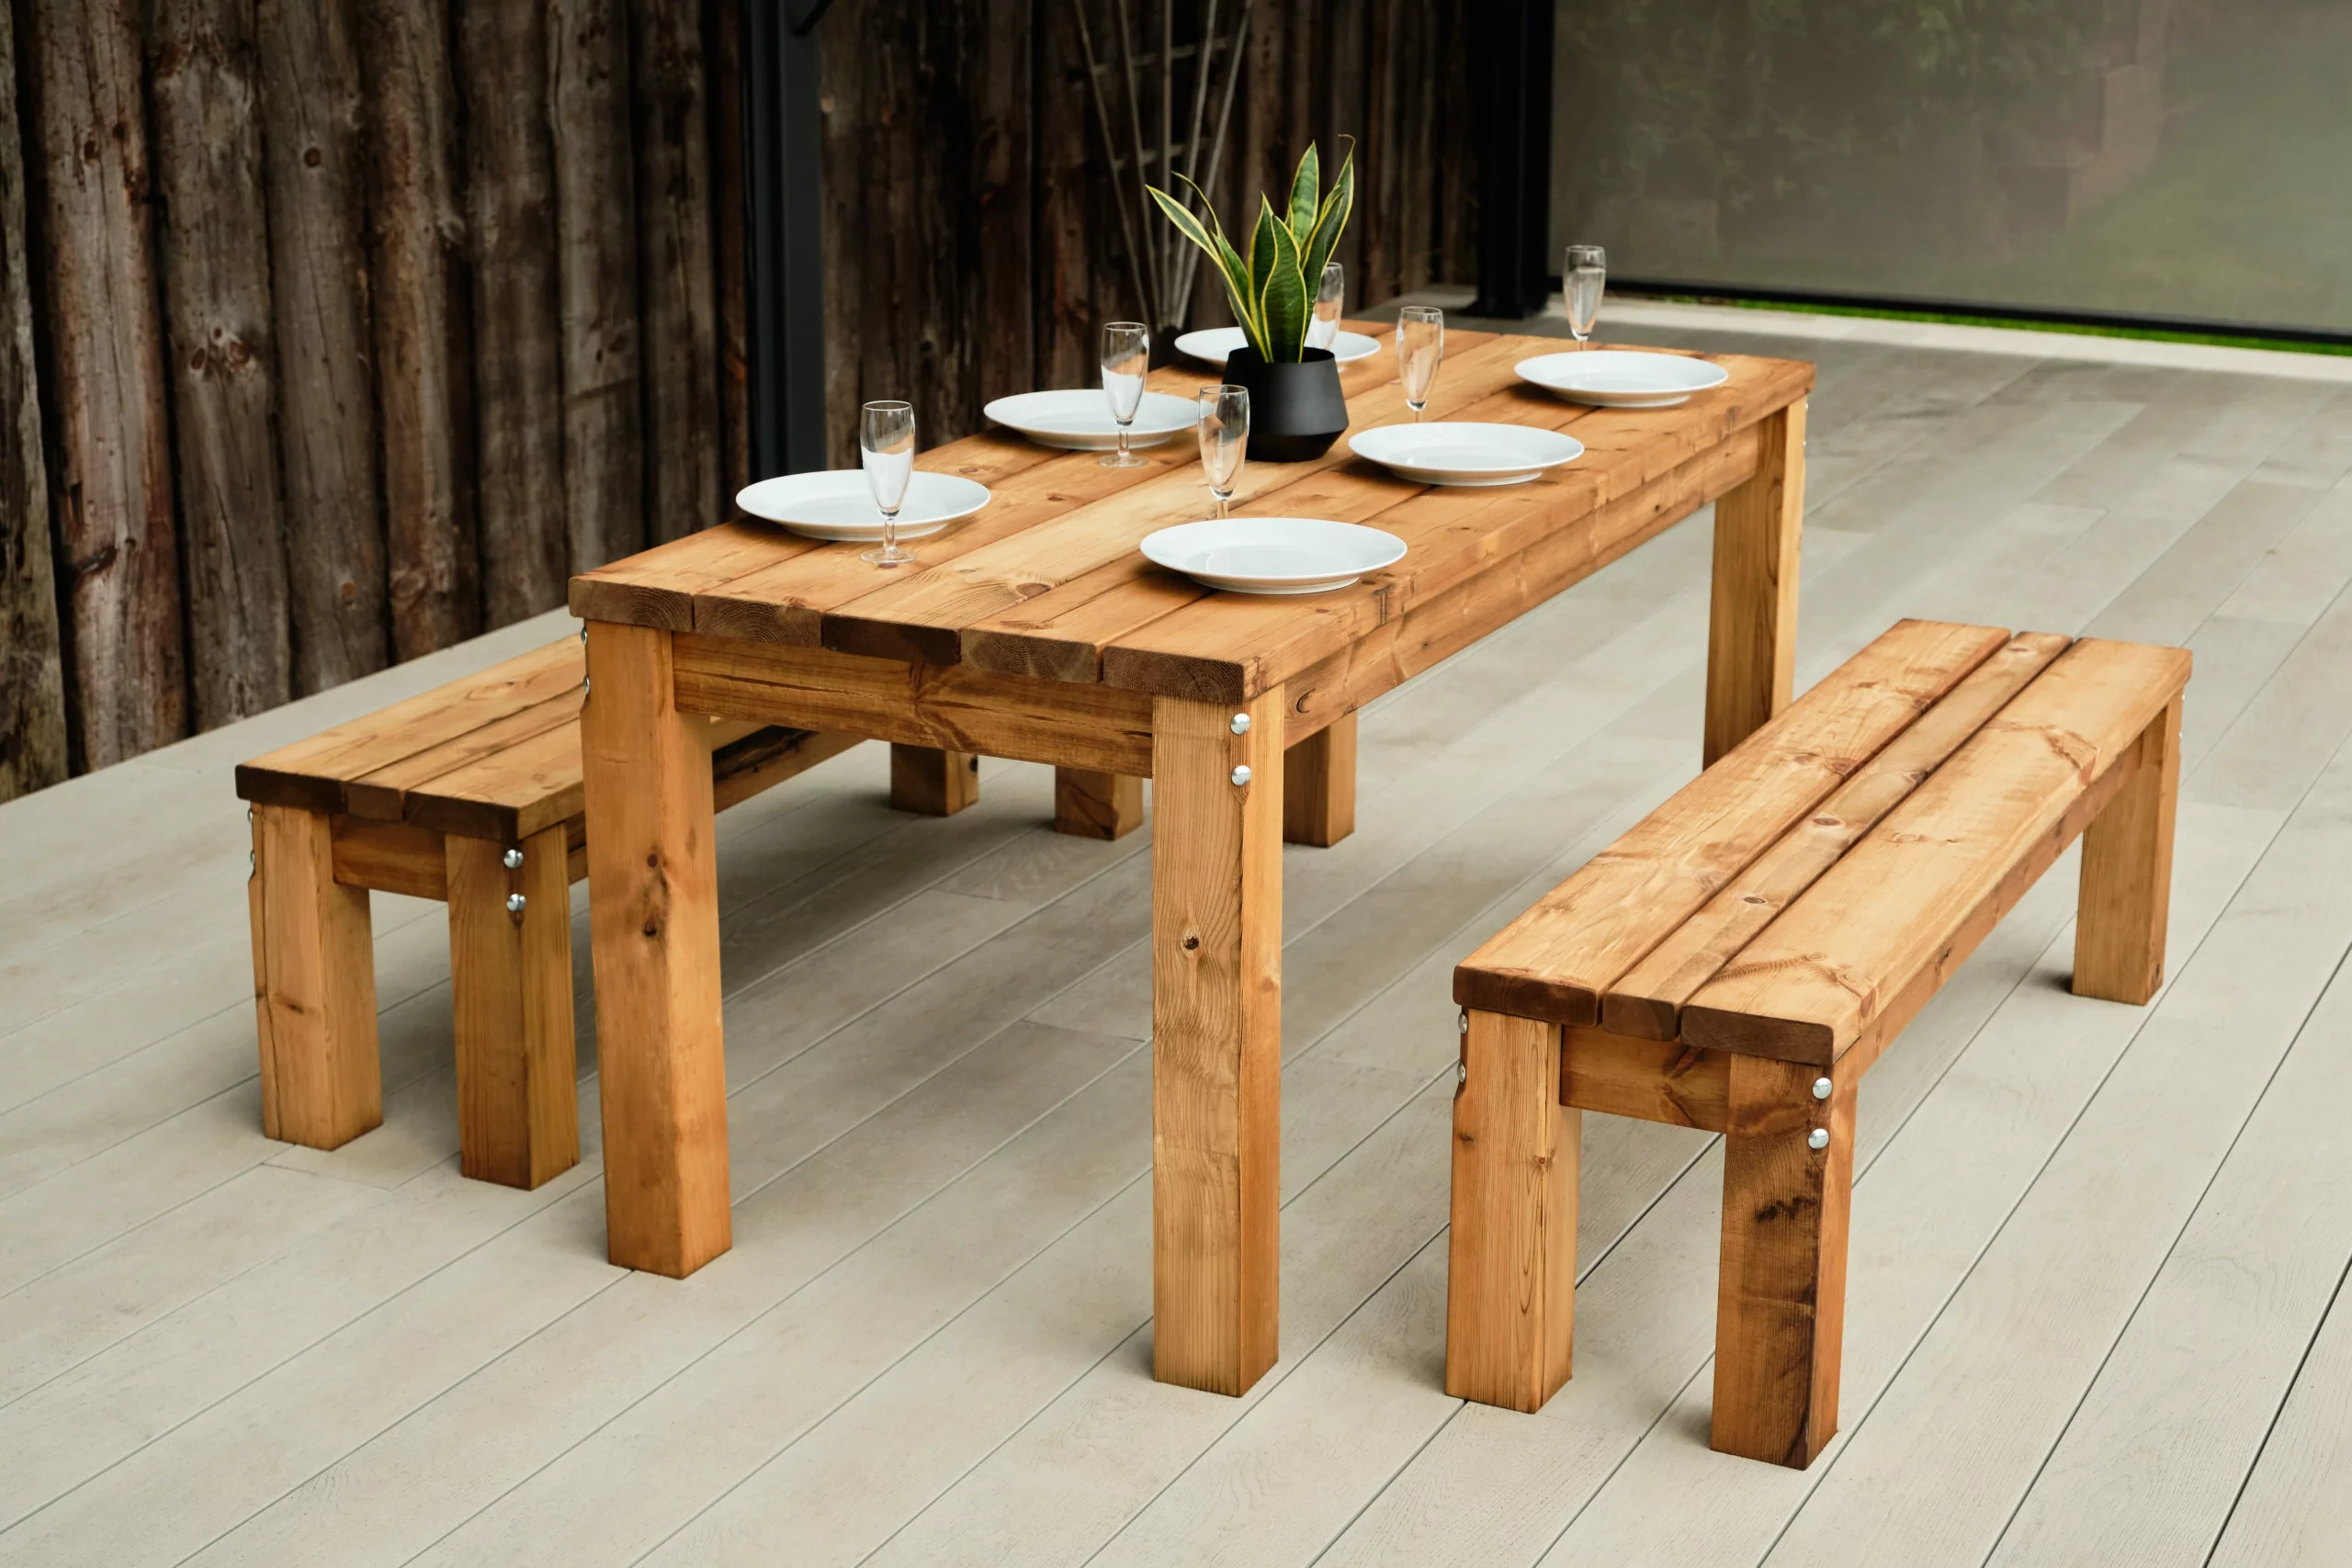 Wooden Rectangular Table and Benches - Whinfell Range for Indoor & Outdoor Use